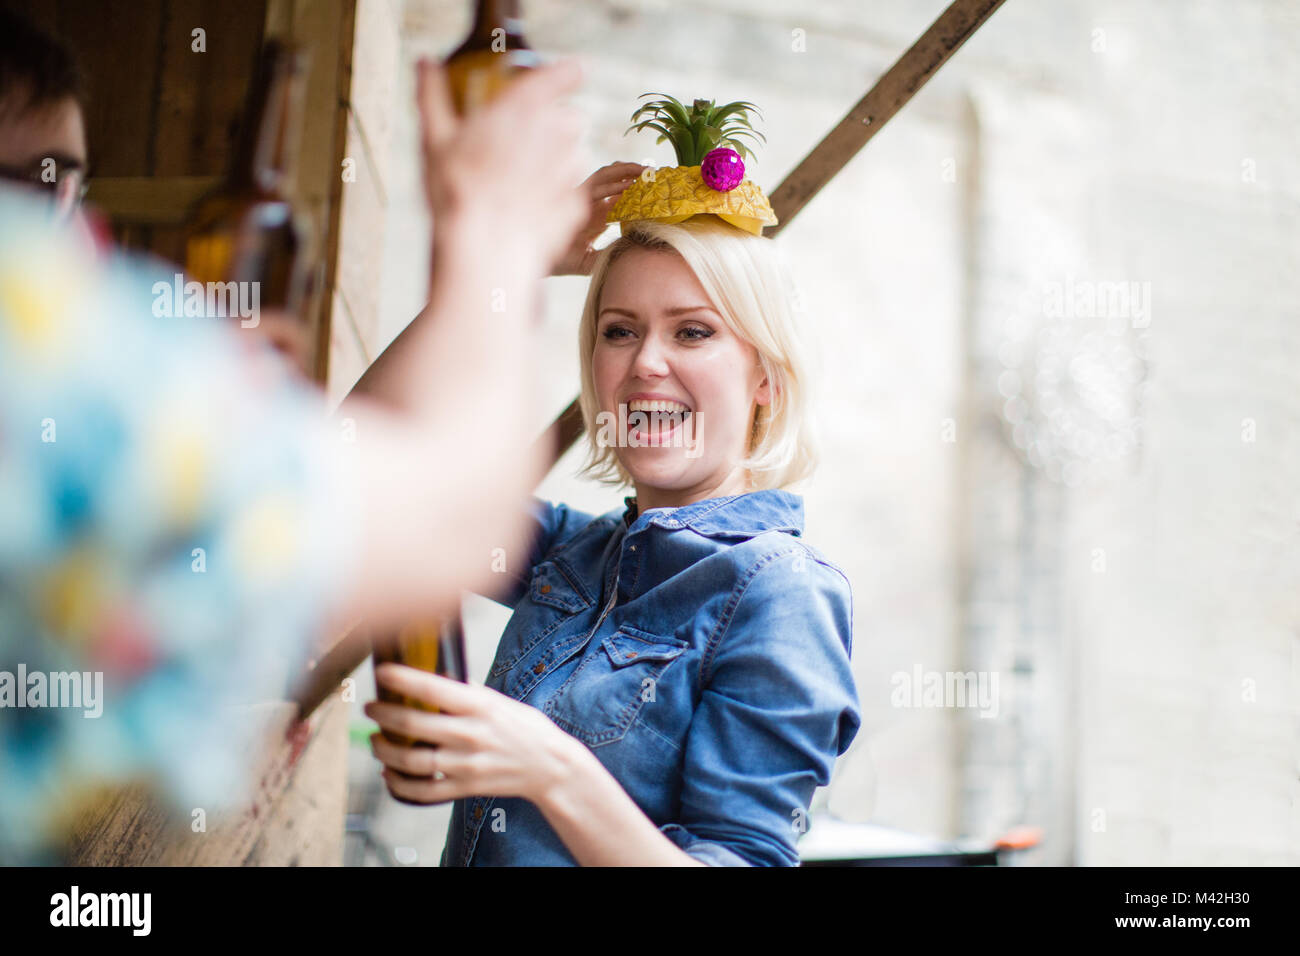 Young adult female posing with a pineapple on her head Stock Photo